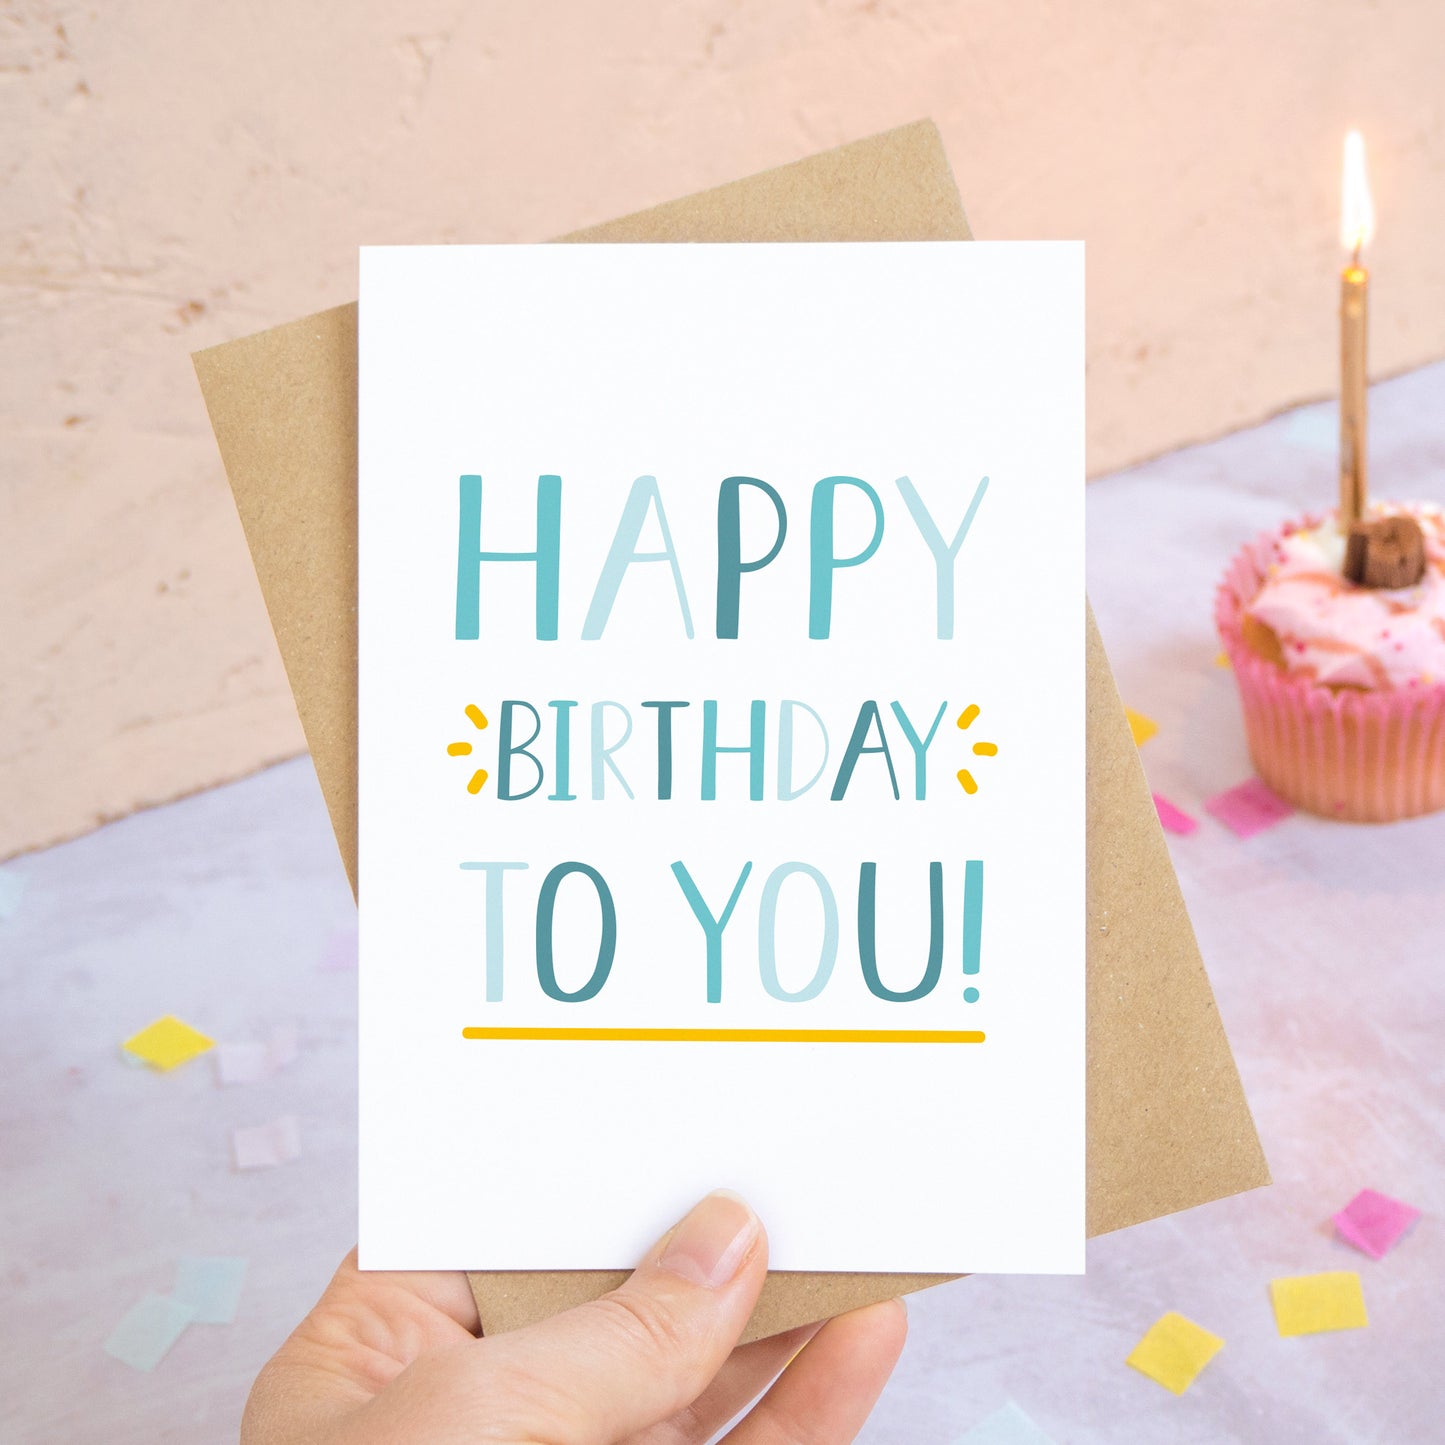 A happy birthday to you card in blue photographed over a grey and peach background with pieces of confetti and a pink cupcake with a single candle.